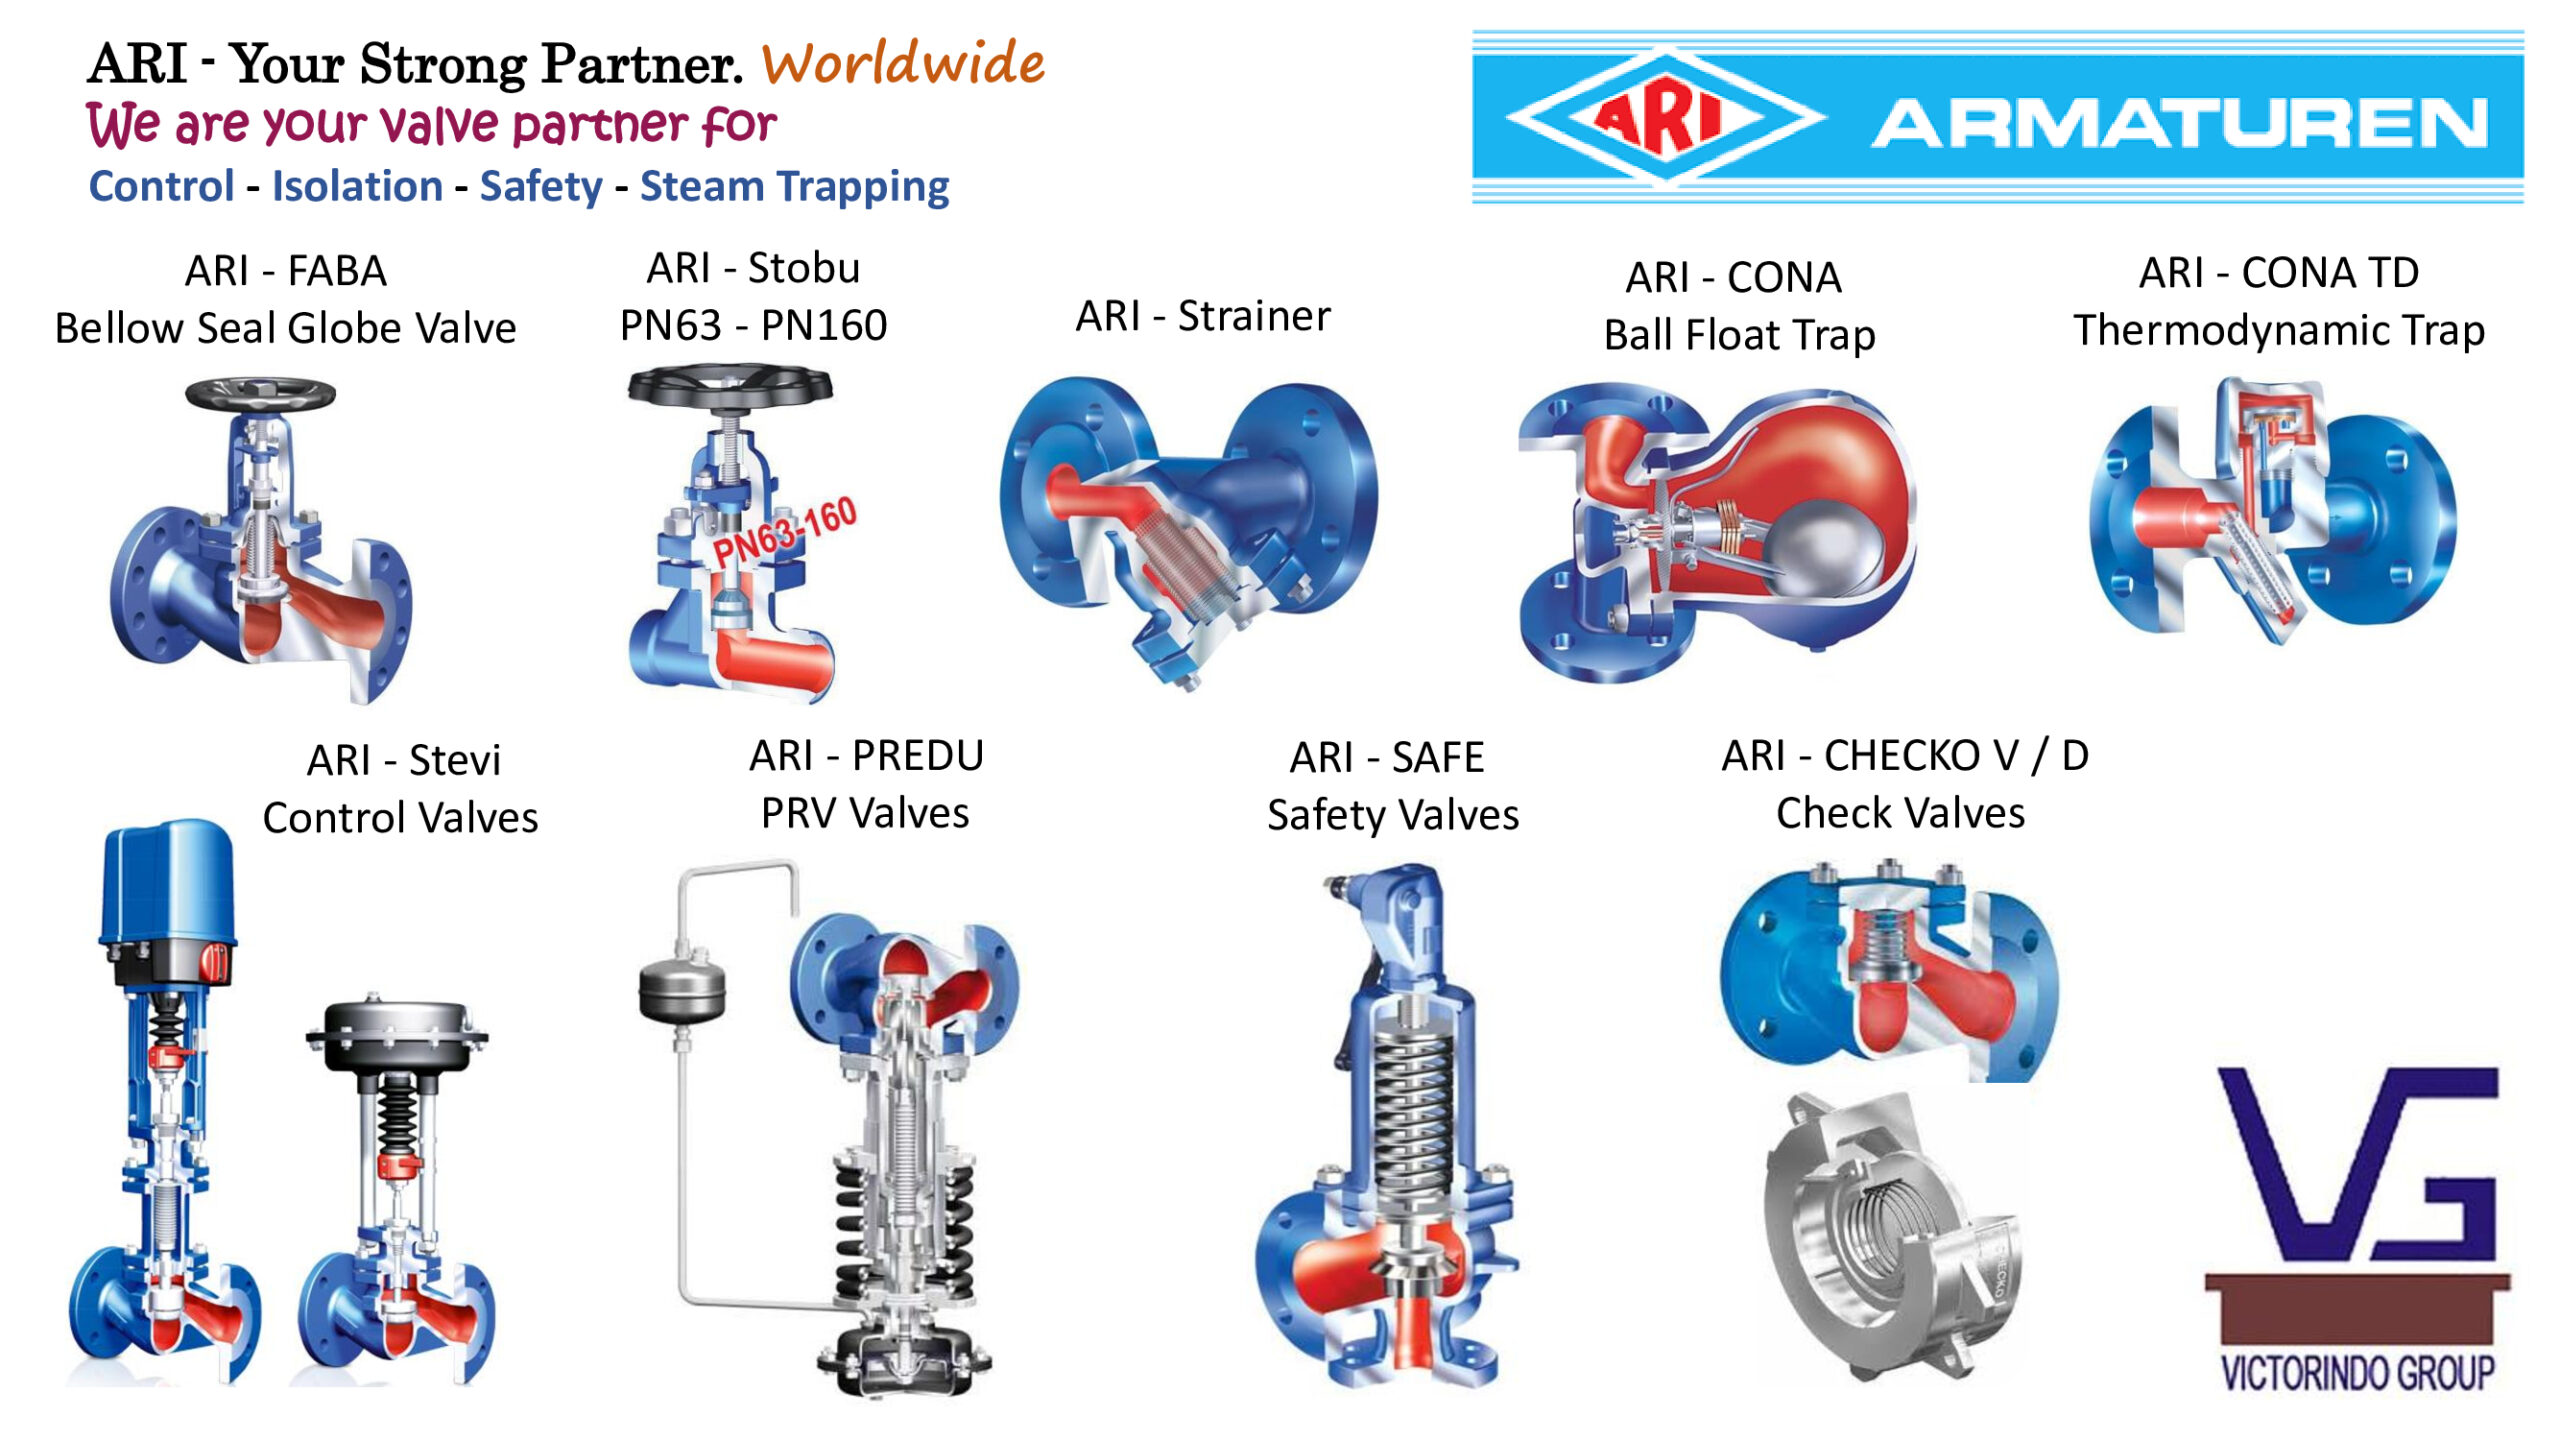 You are currently viewing ARI Armaturen Valves